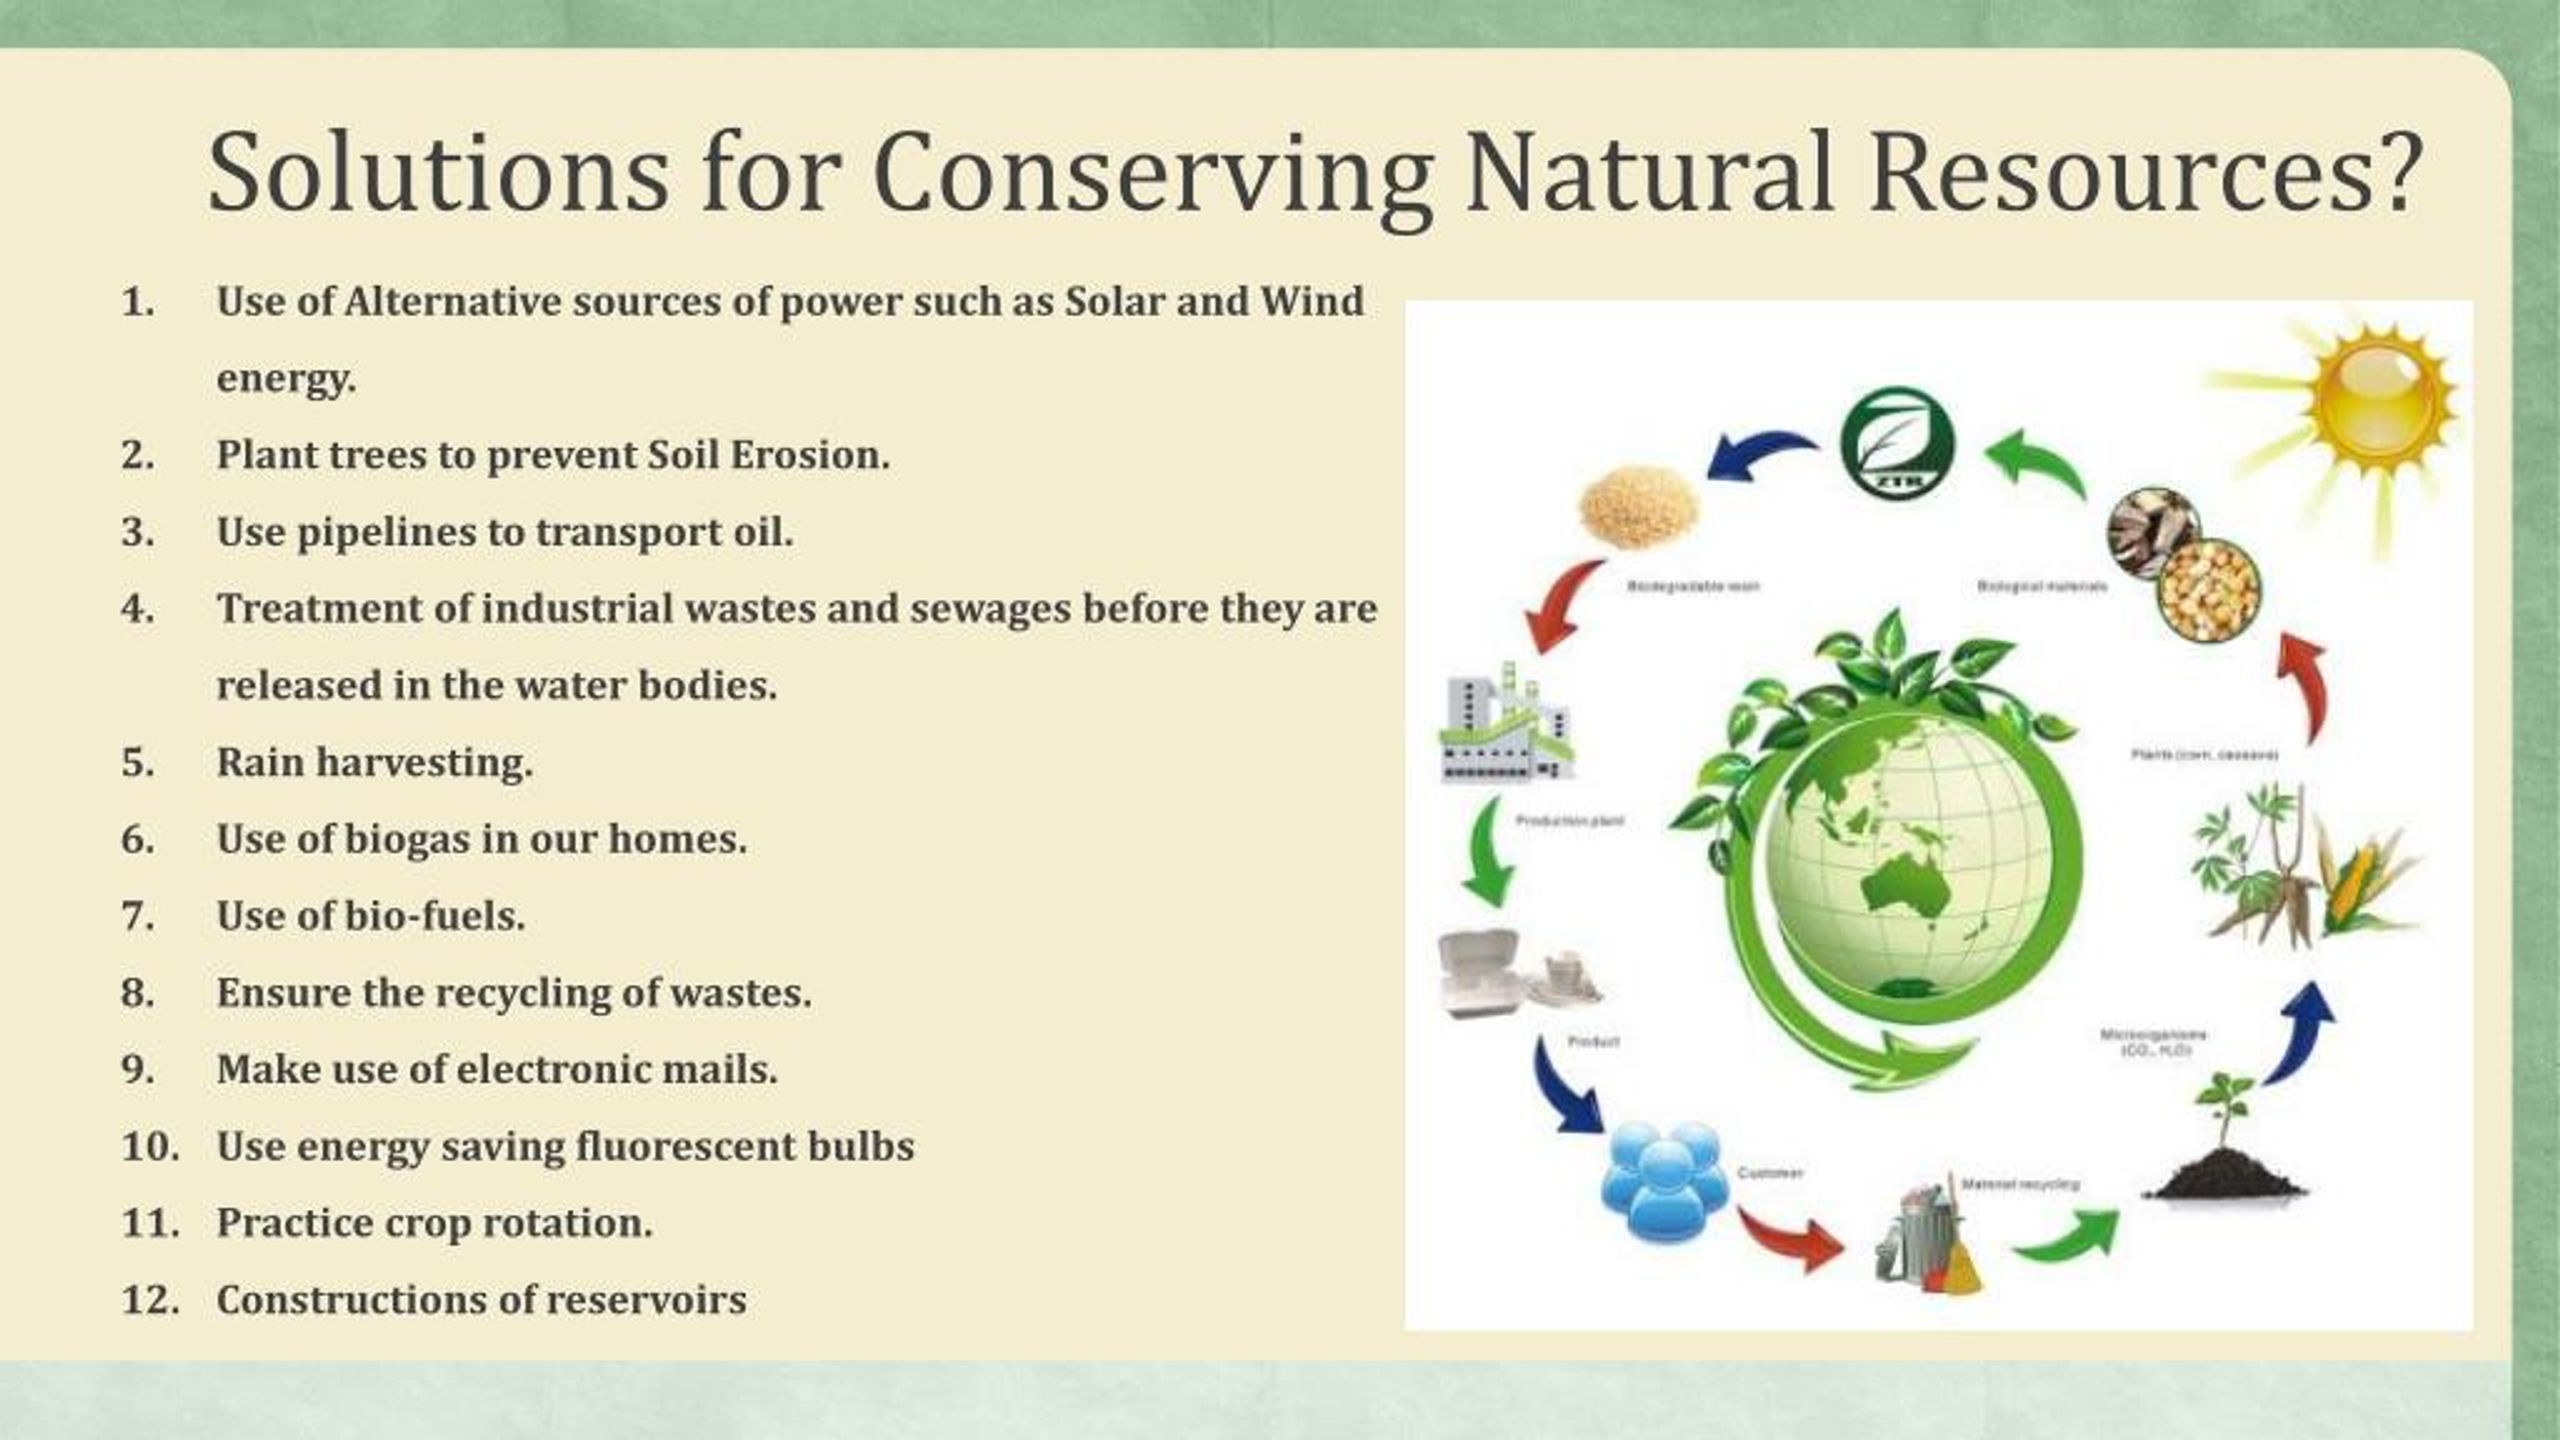 powerpoint presentation on depletion of natural resources